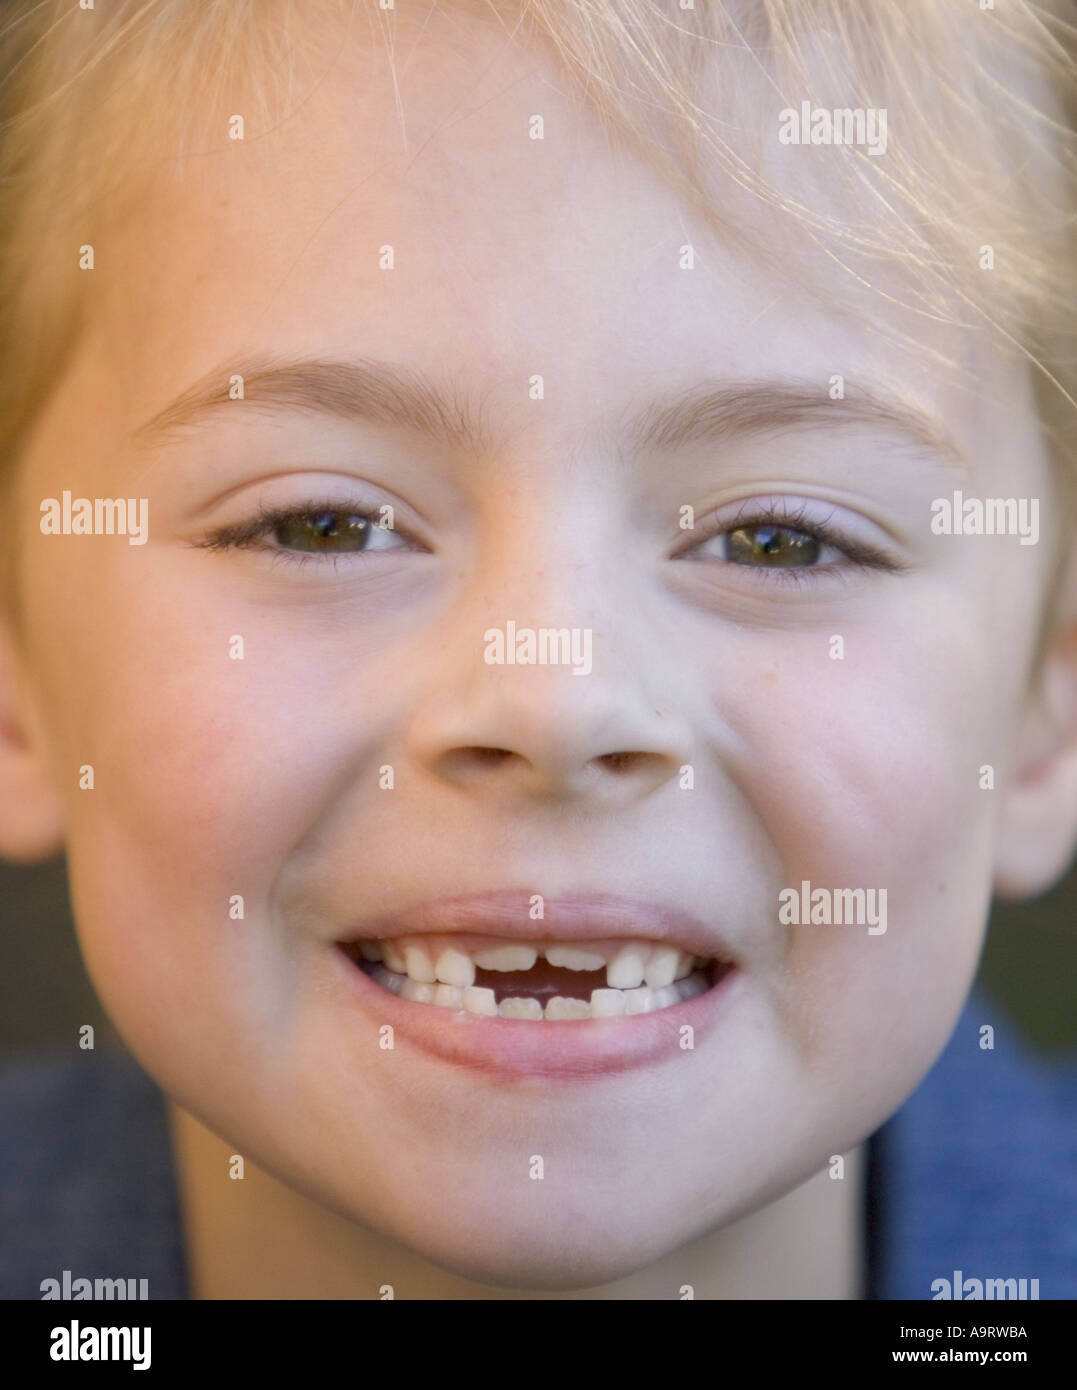 Child smiling with missing teeth Stock Photo